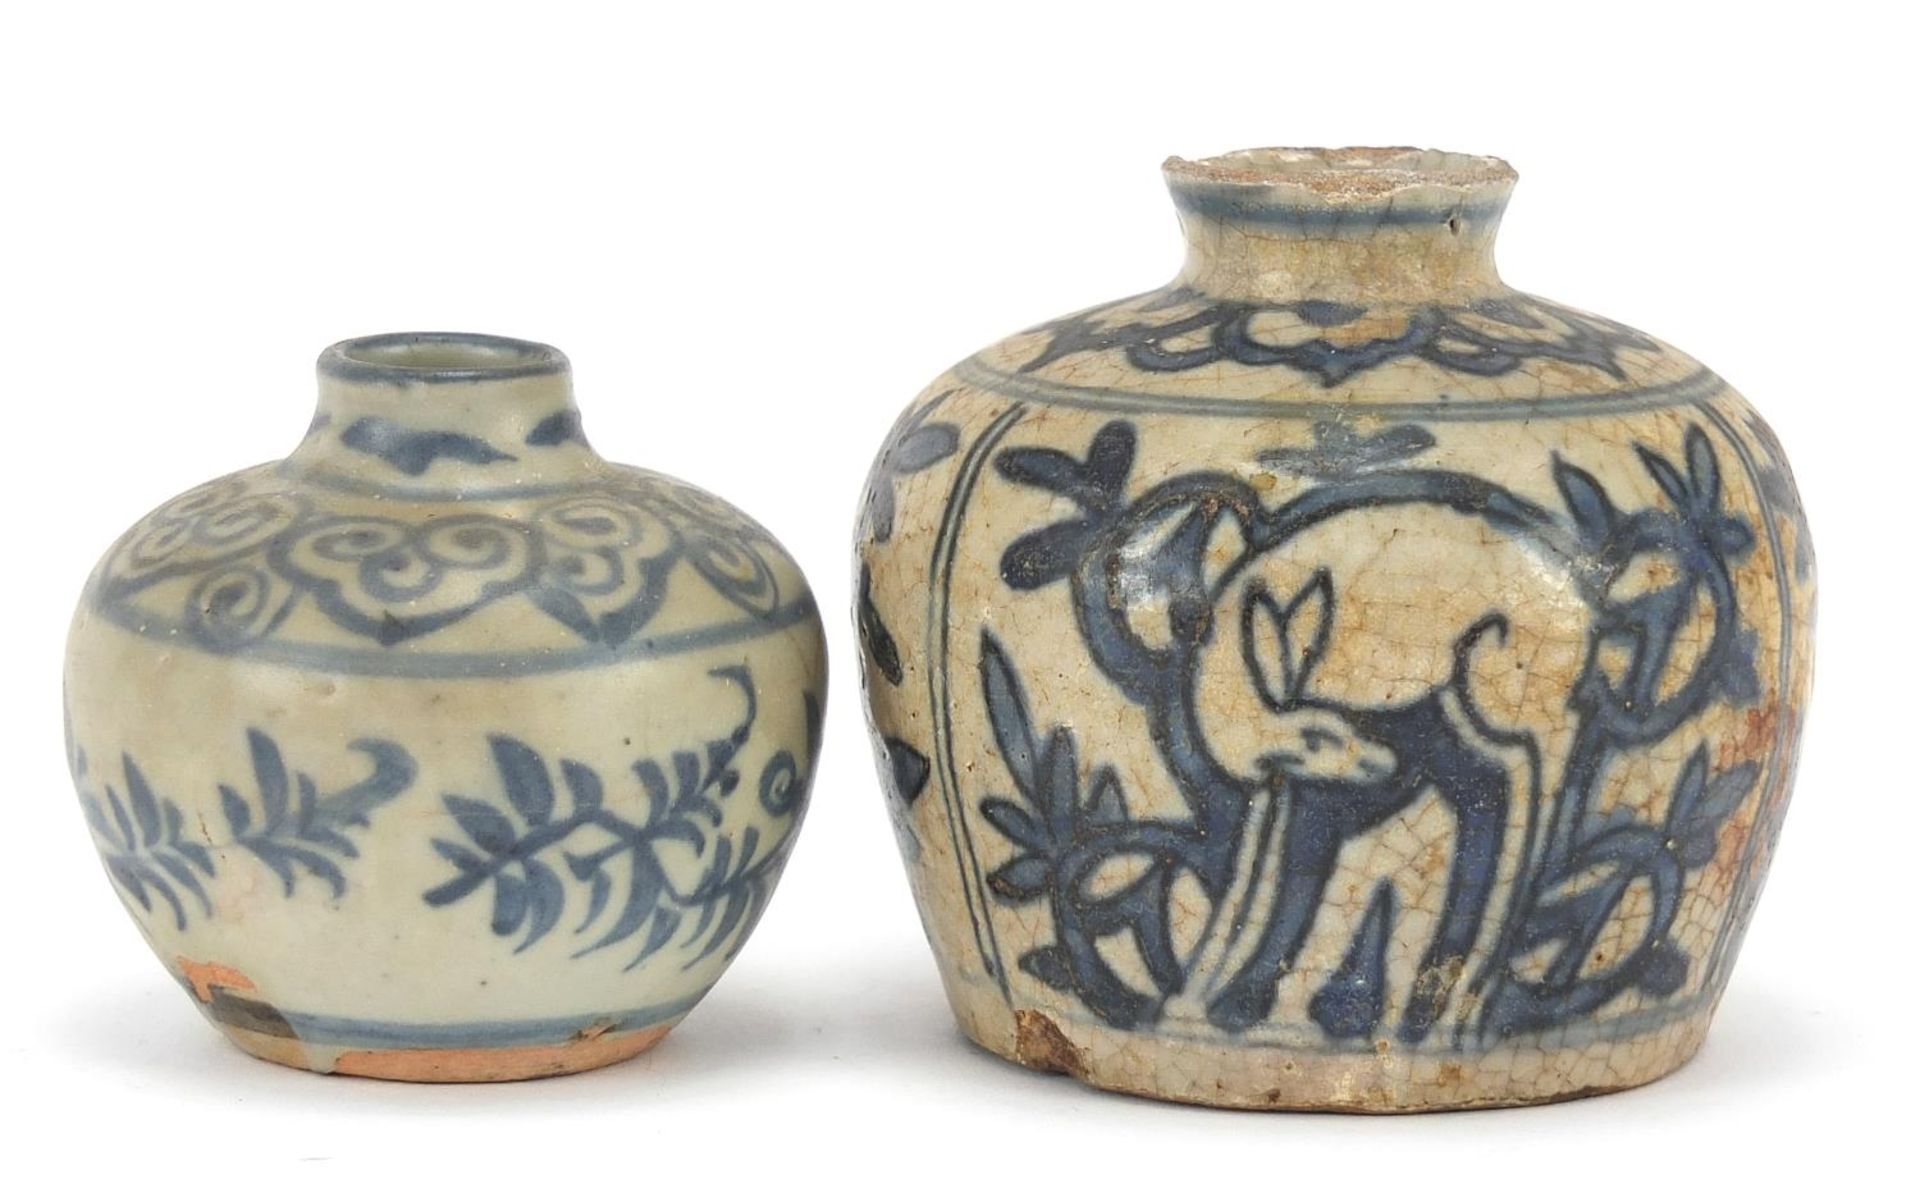 Annamese blue and white porcelain vase hand painted with animals and a similar example, the